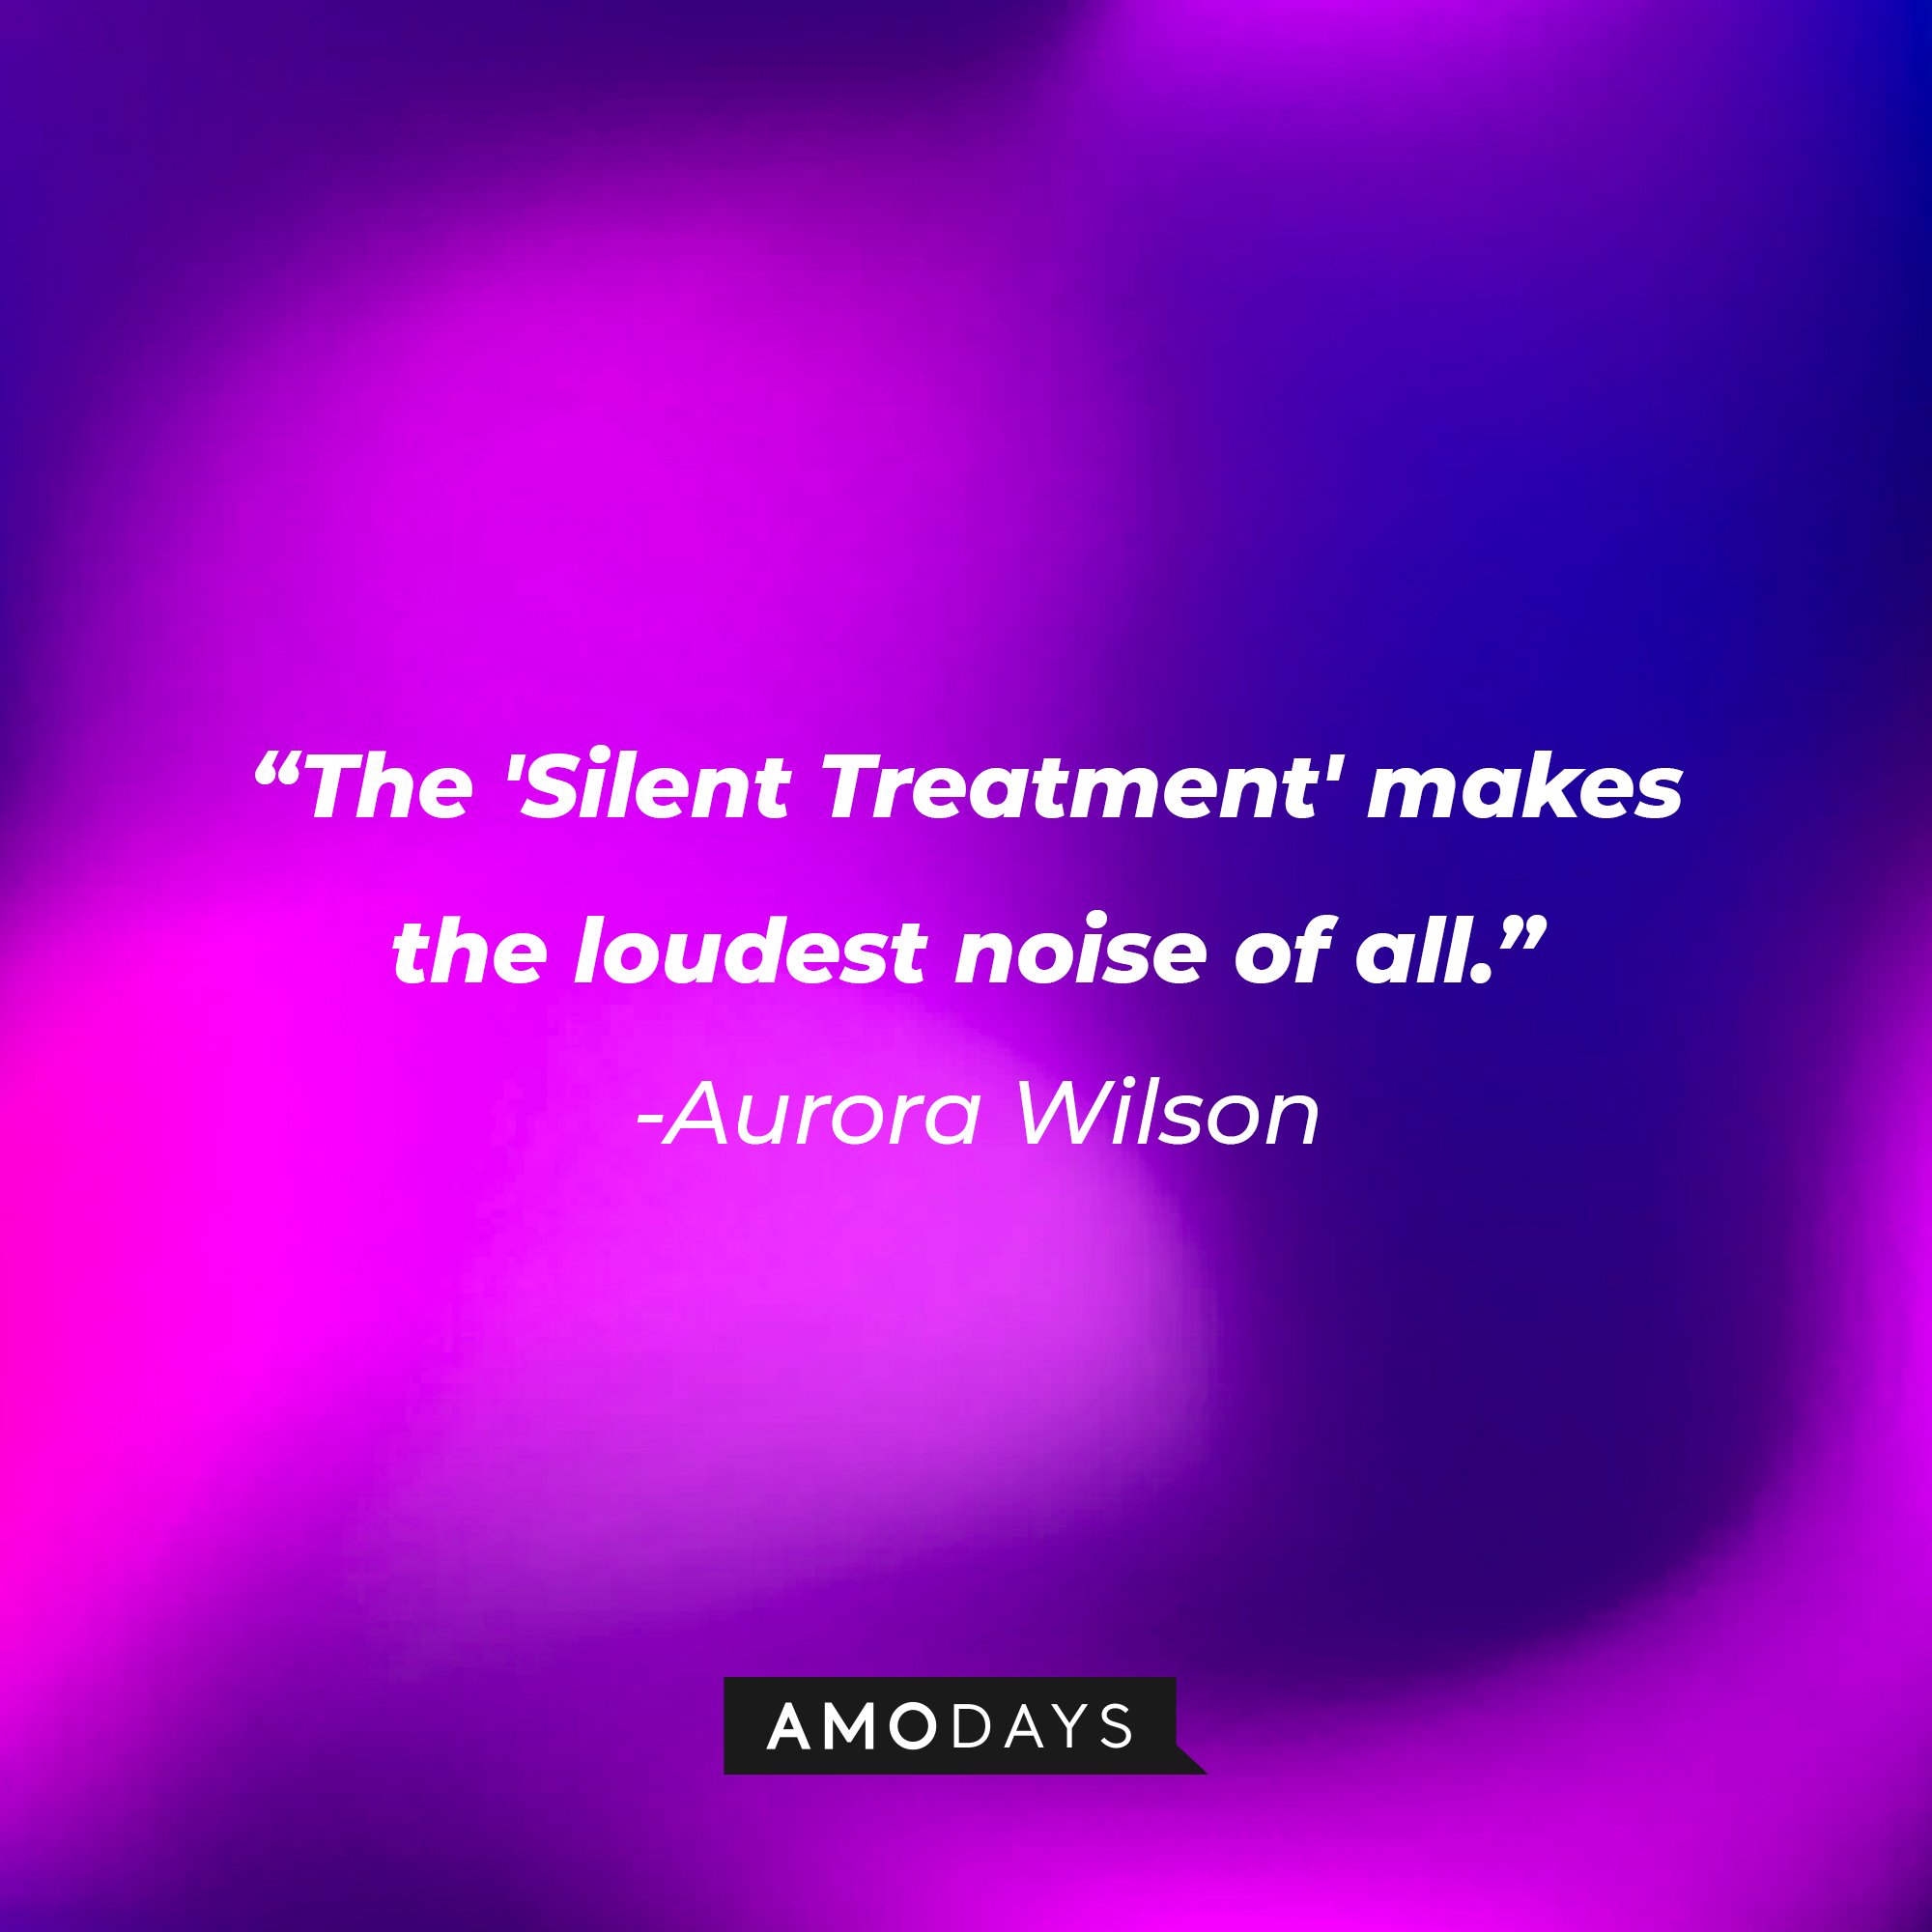 Aurora Wilson's quote:\\\\u00a0"The 'Silent Treatment' makes the loudest noise of all."\\\\u00a0| Image: AmoDays